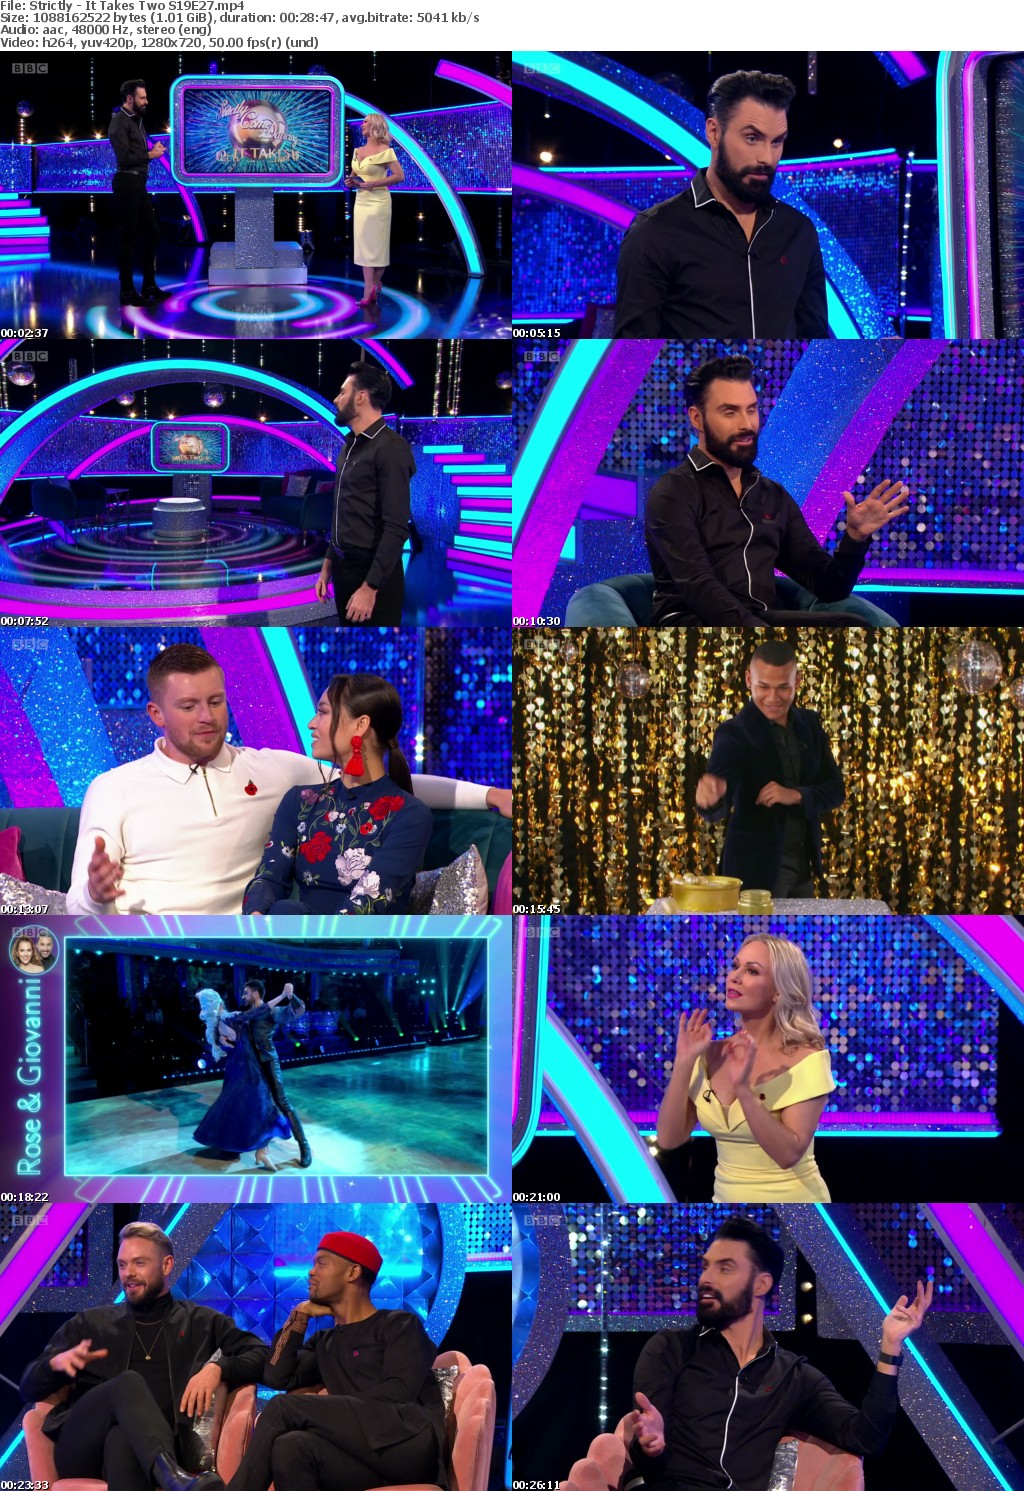 Strictly - It Takes Two S19E27 (1280x720p HD, 50fps, soft Eng subs)